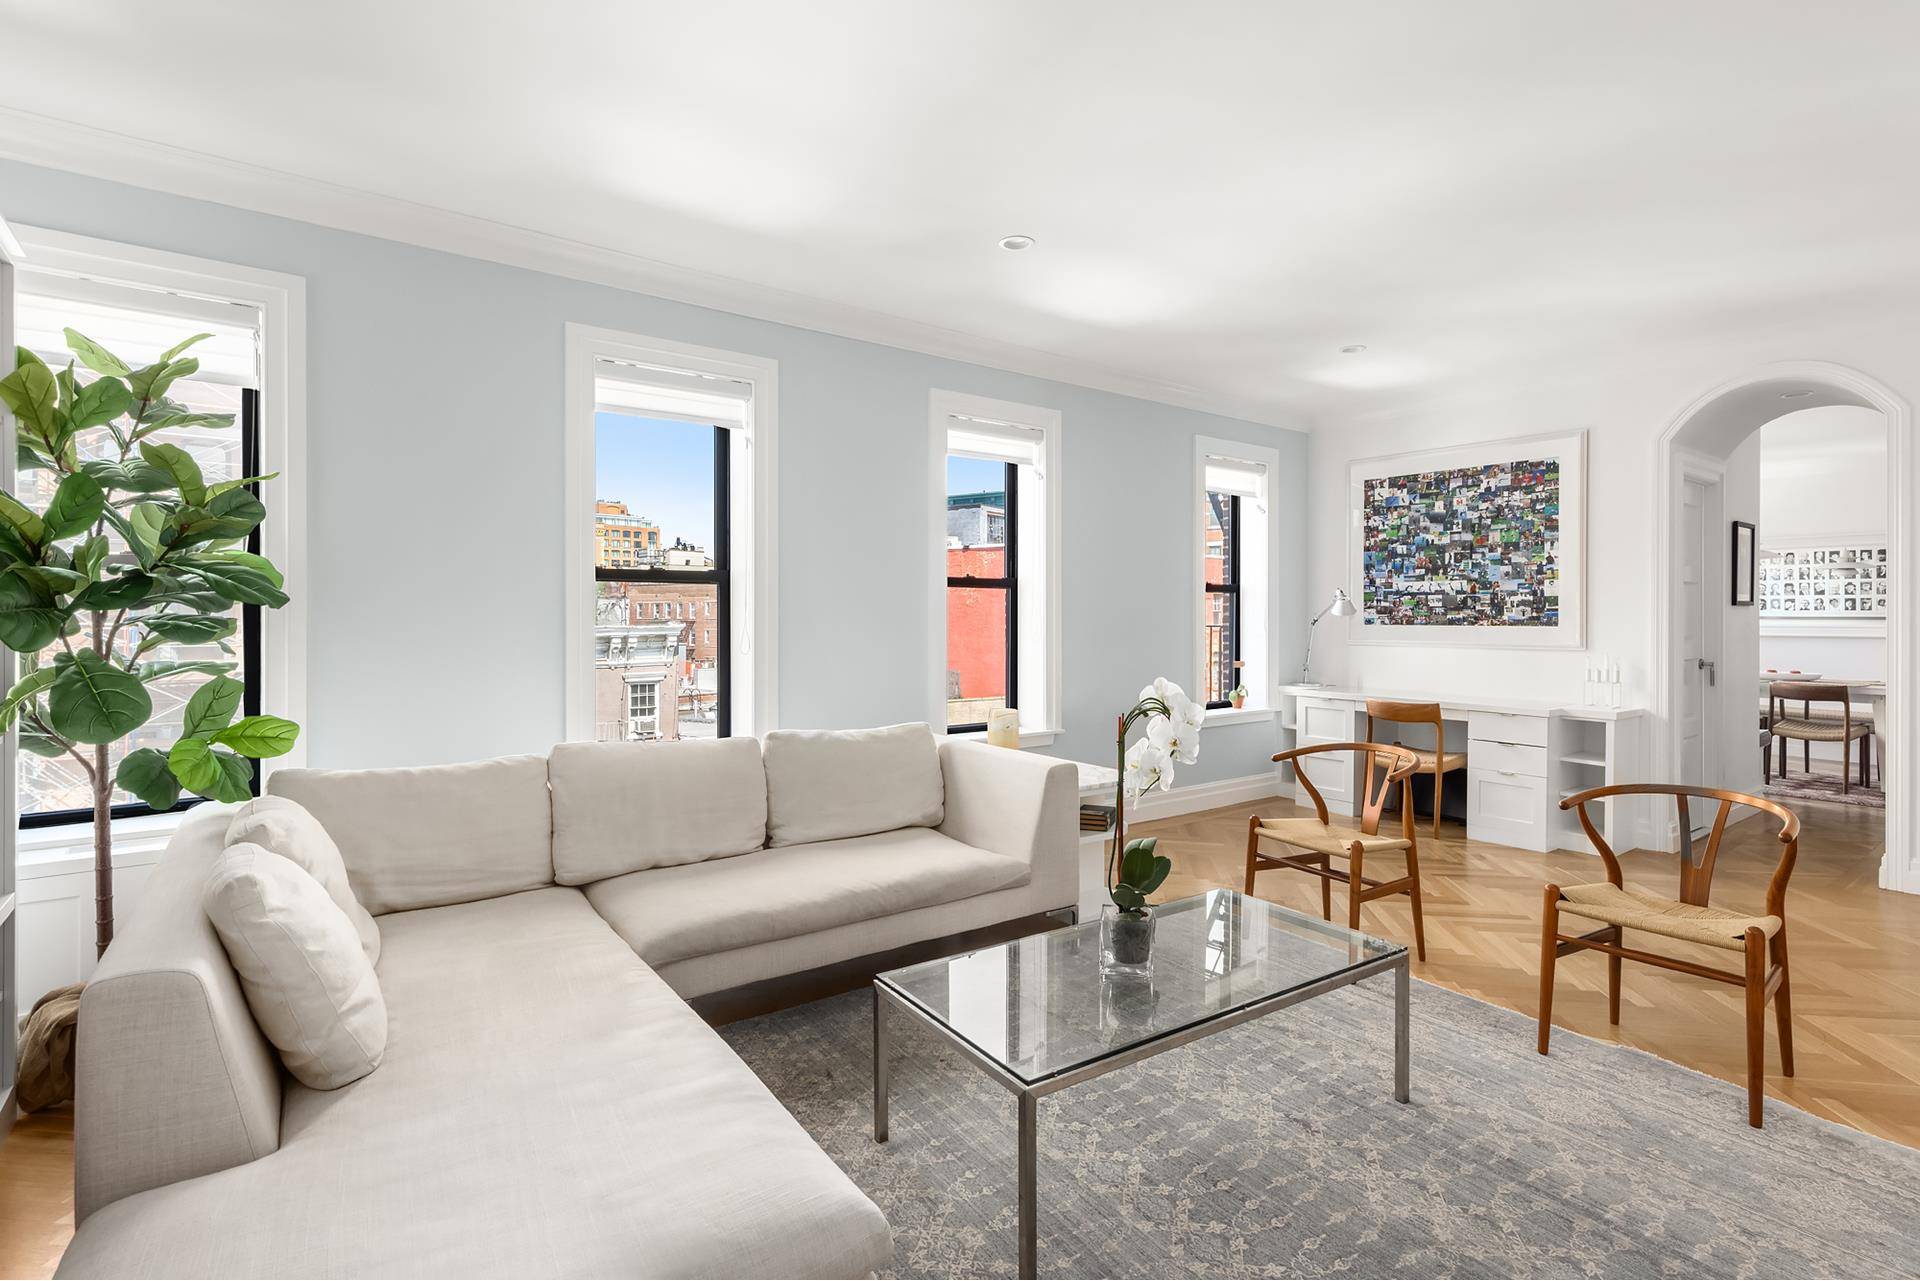 Stunning and sun drenched, this turnkey three bedroom, three bath offering on tree lined West 11th Street is a prime West Village home.